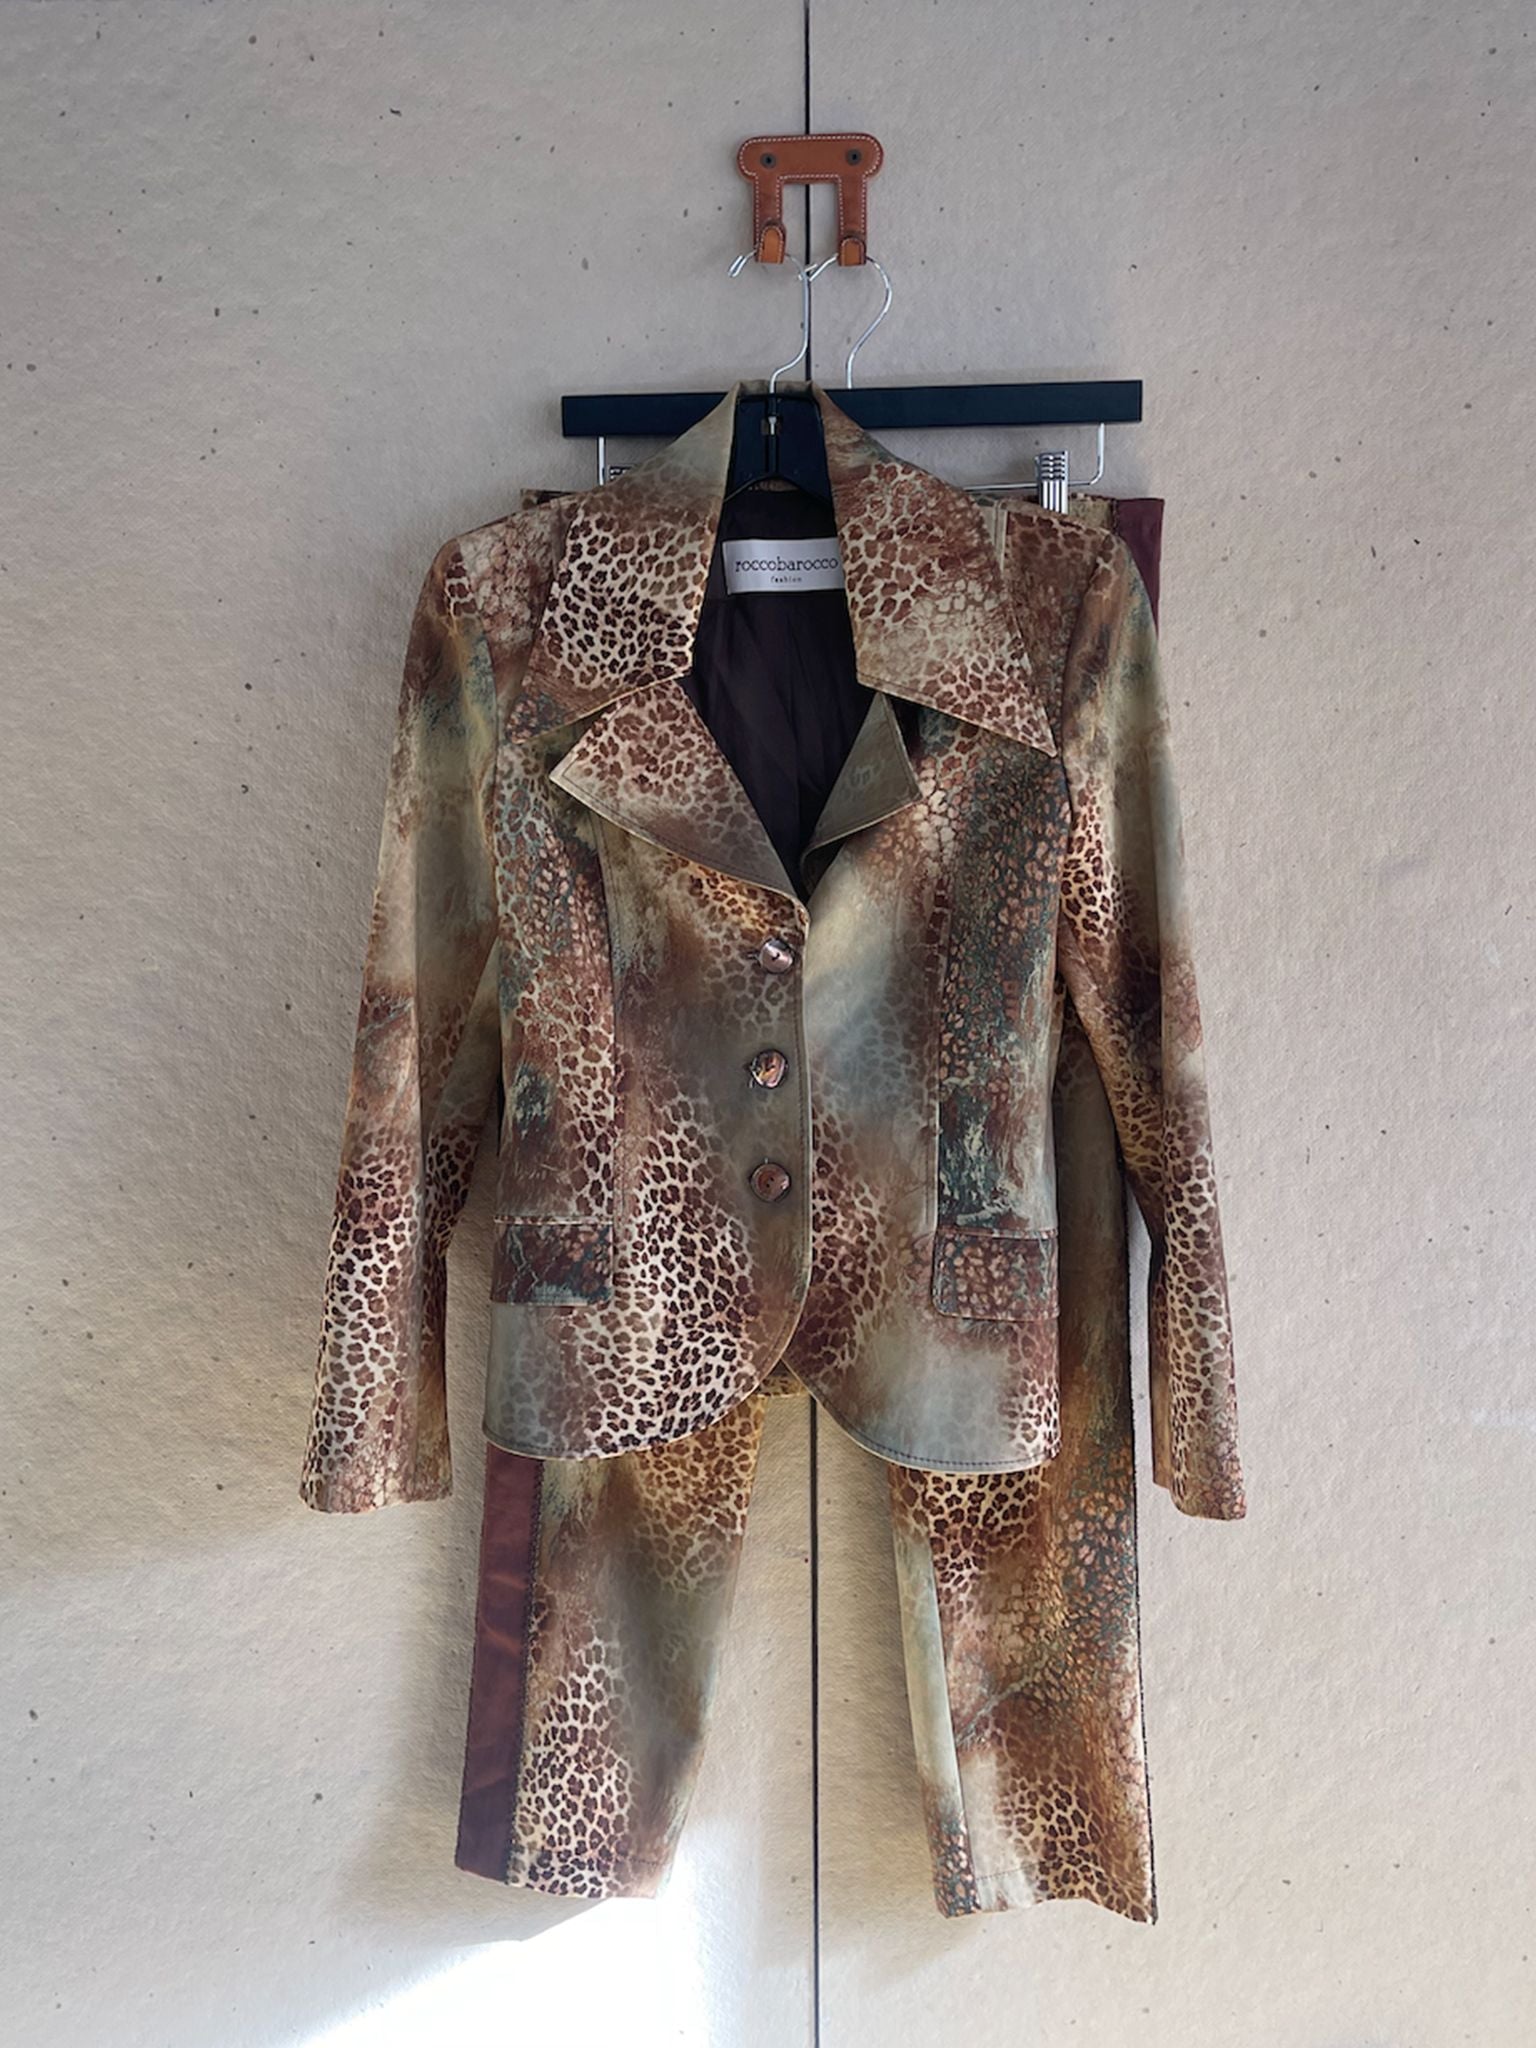 ROCCO BAROCCO ANIMAL PRINT TWO PIECE SUIT - 1